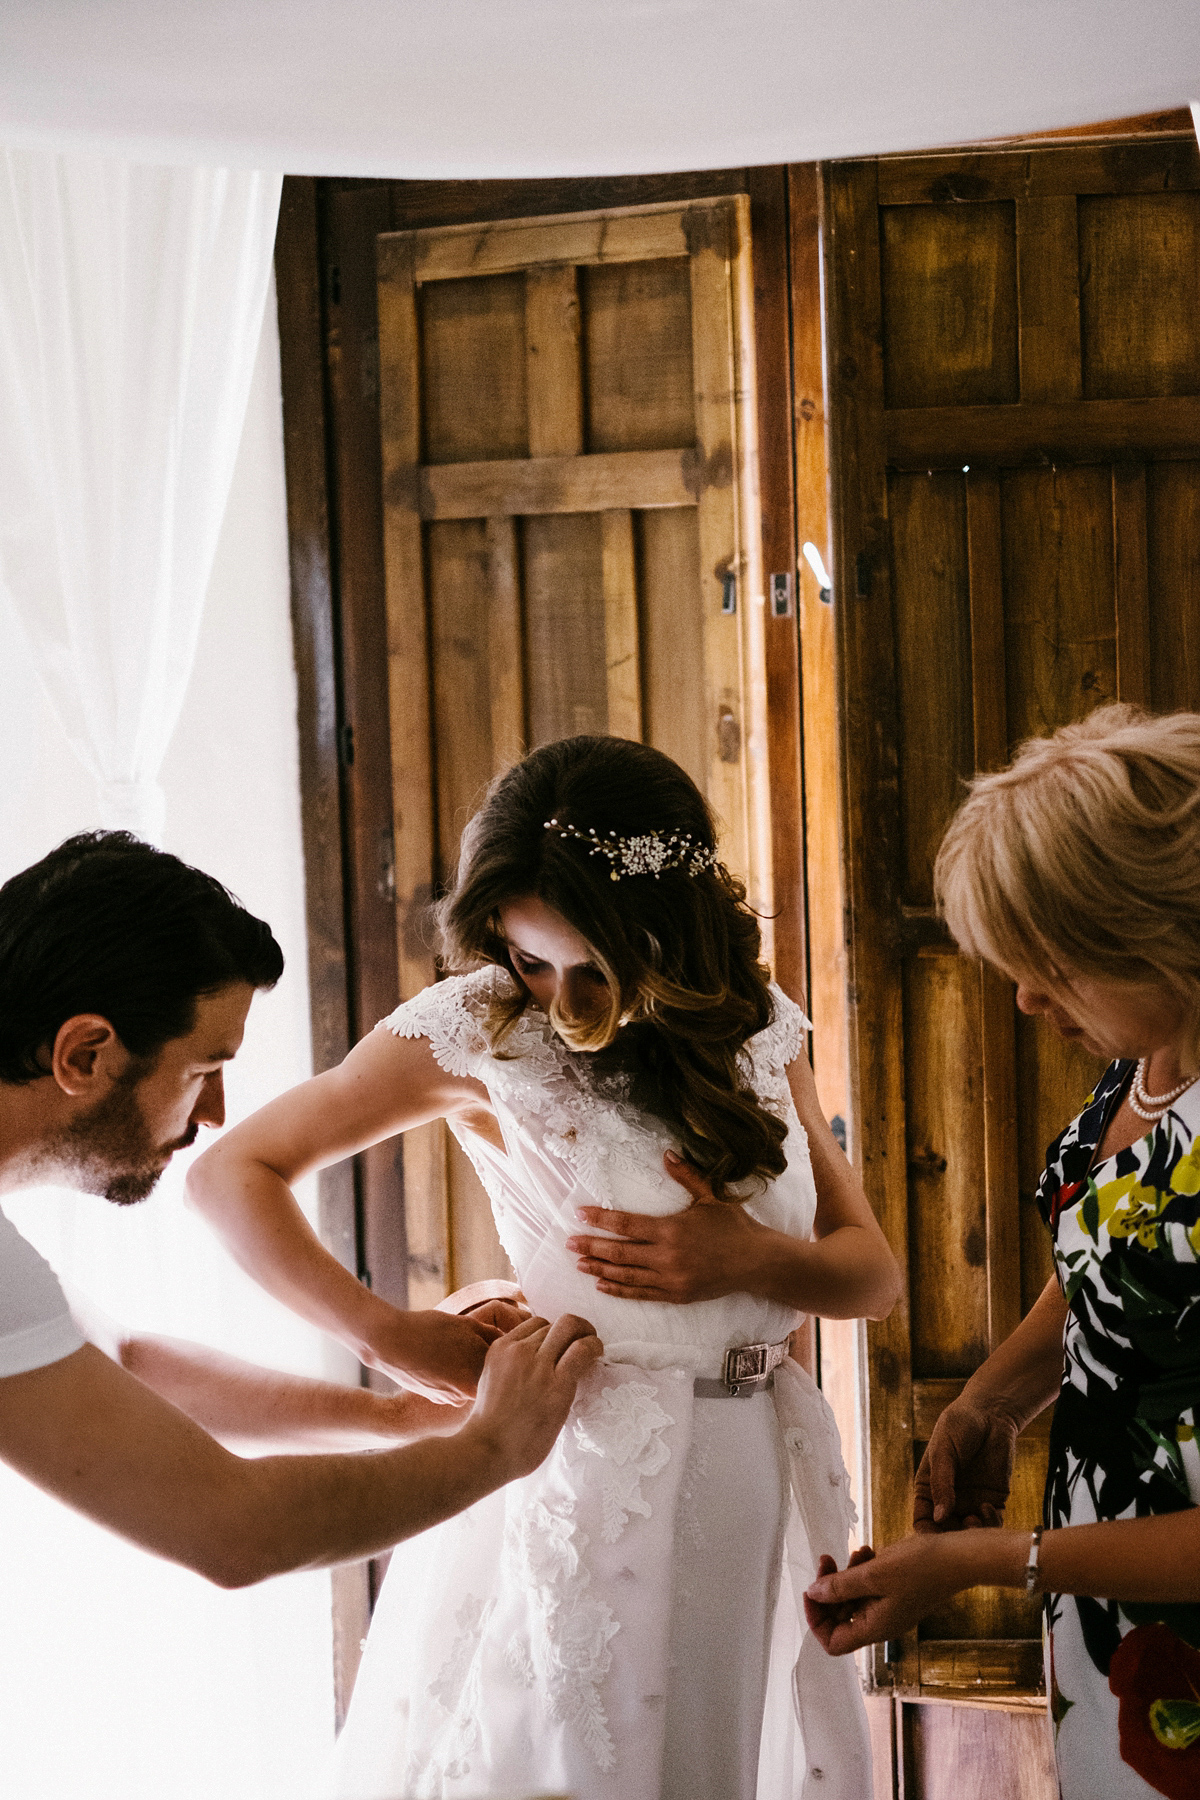 Bride Laura wears a bespoke wedding dress by Wilden Bride for her elegant destination wedding in Spain. Photography by Claudia Rose Carter.